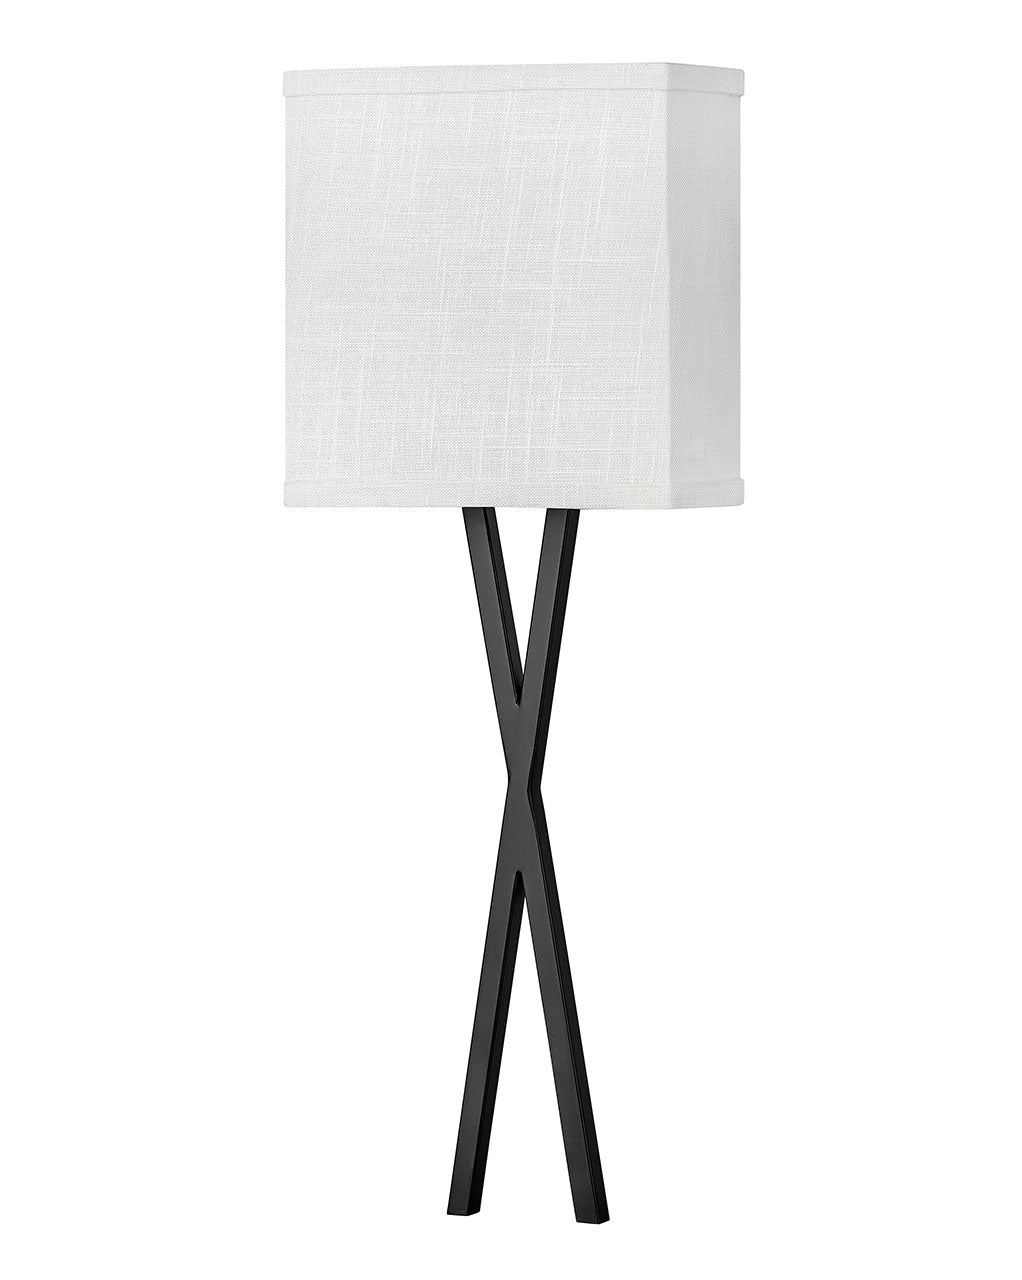 Hinkley - 41102BK - LED Wall Sconce - Axis Off White - Black